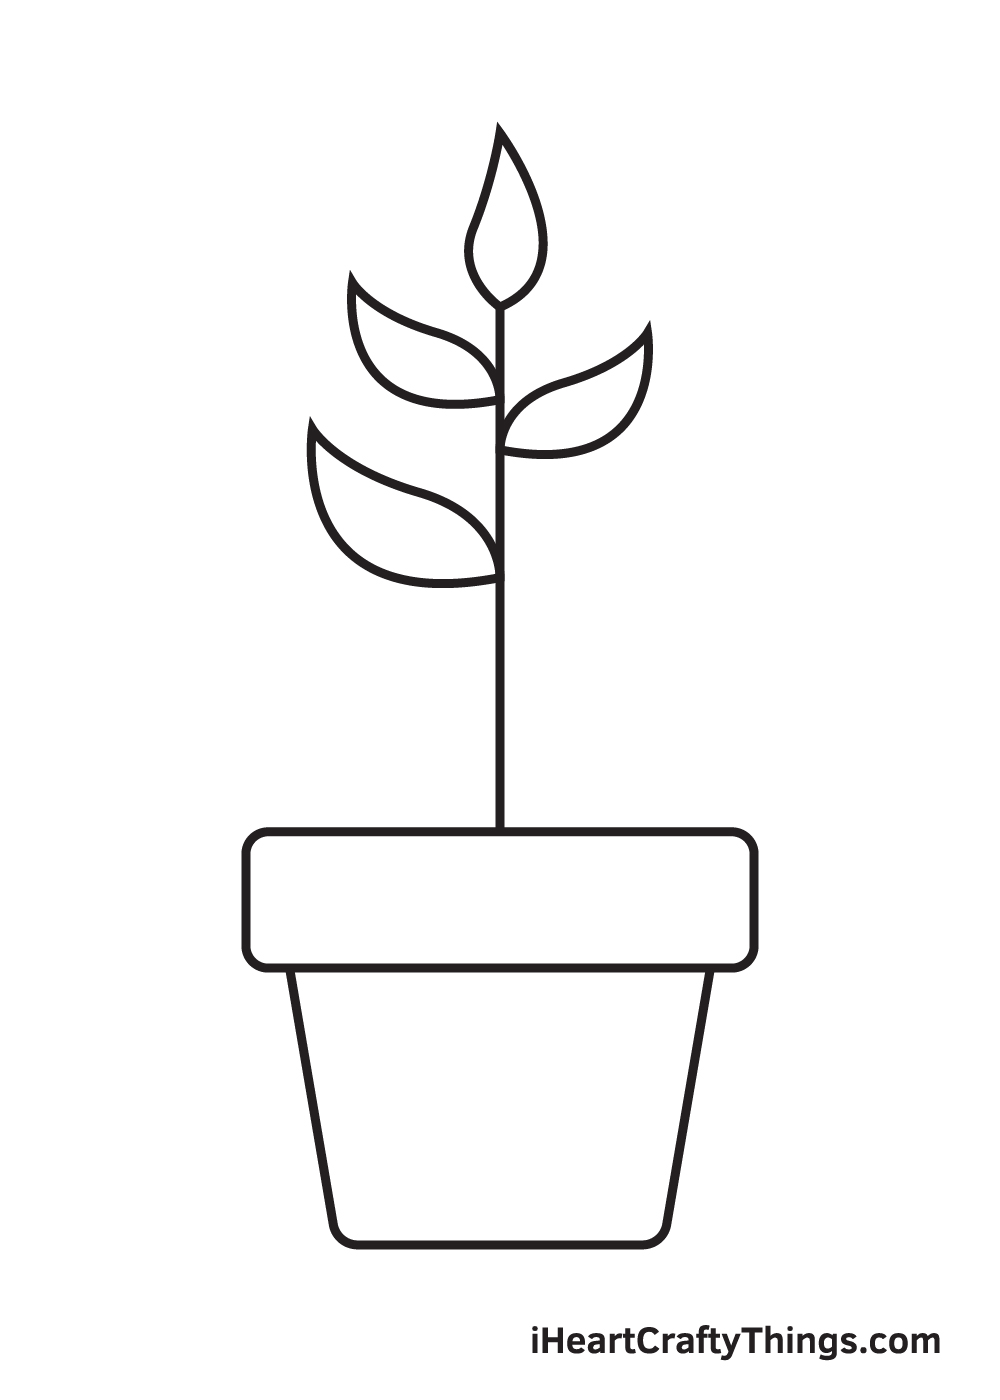 Plant drawing - Step 6